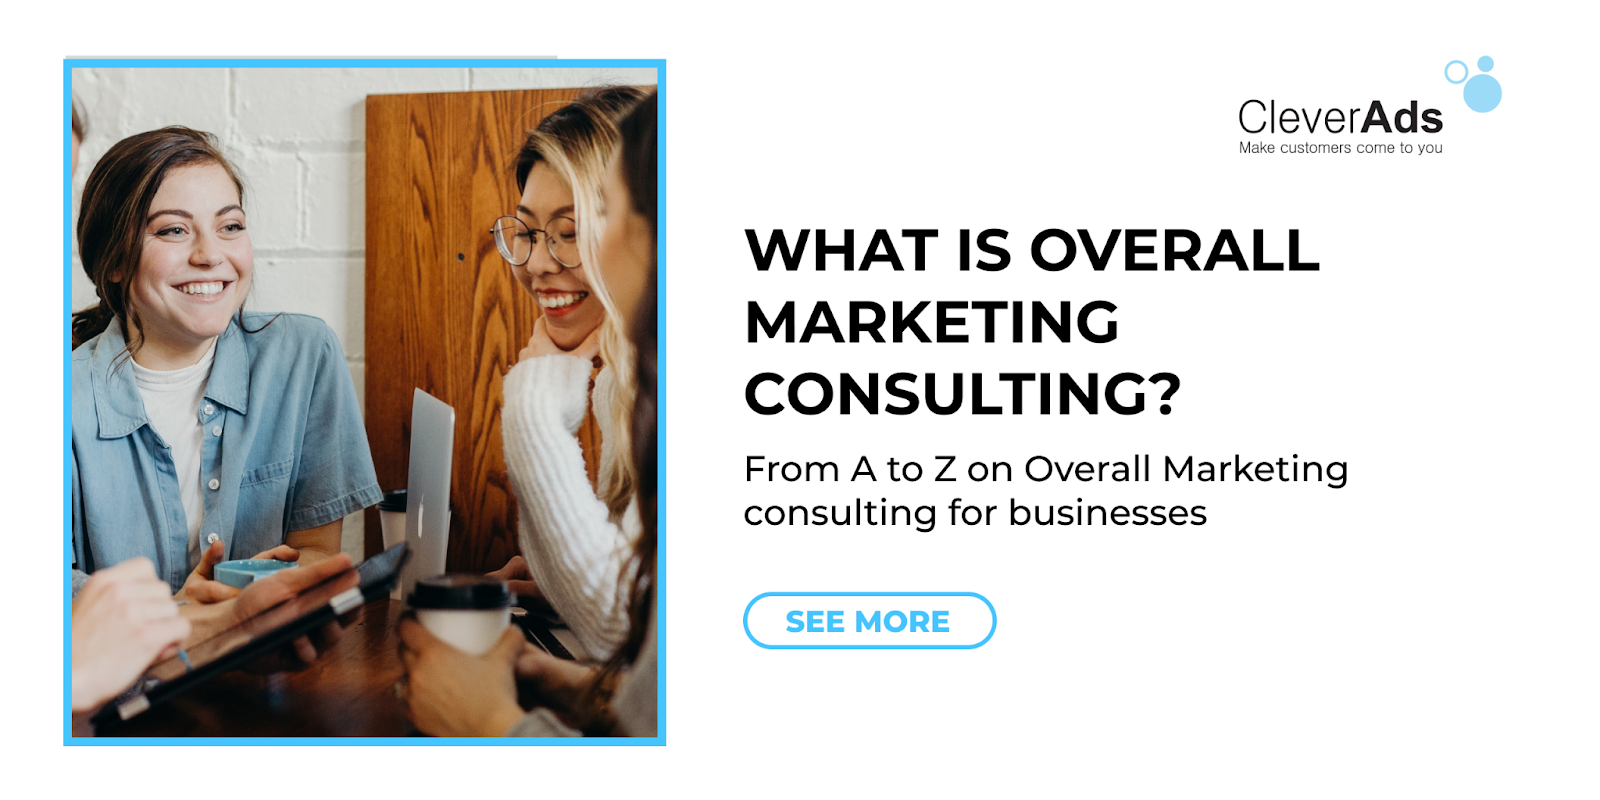 From A to Z on Overall Marketing consulting for businesses